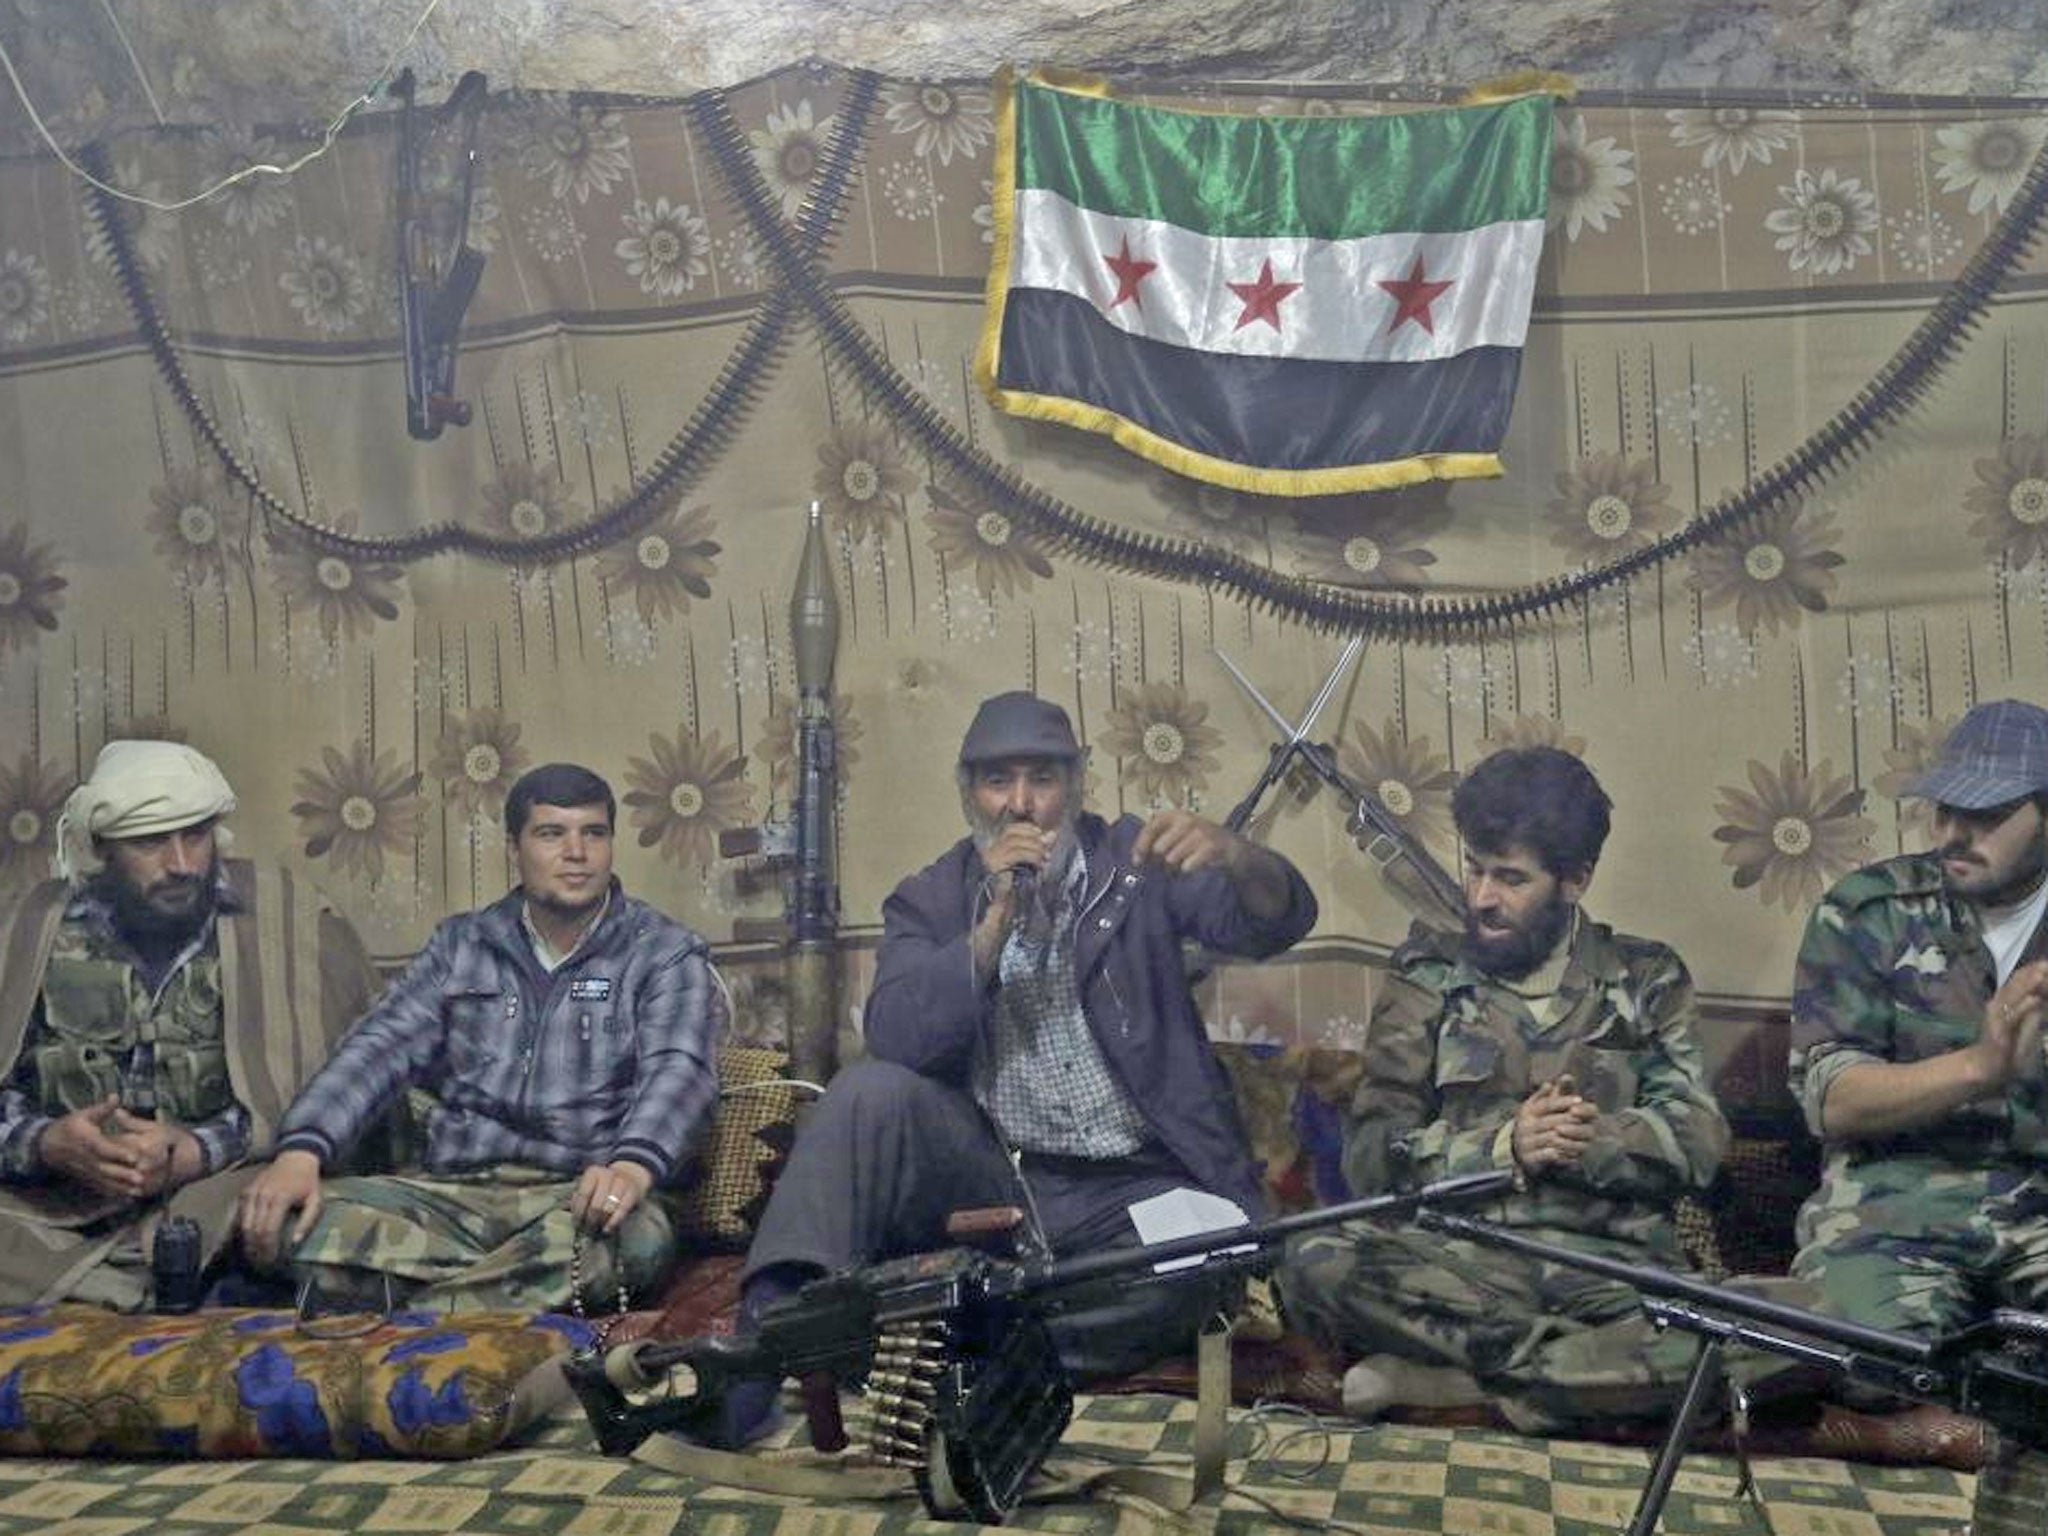 Free Syrian Army fighters gather at one of their caves in Jabal al-Zaweya, Syria, whom reject talks until President Bashar Assad leaves